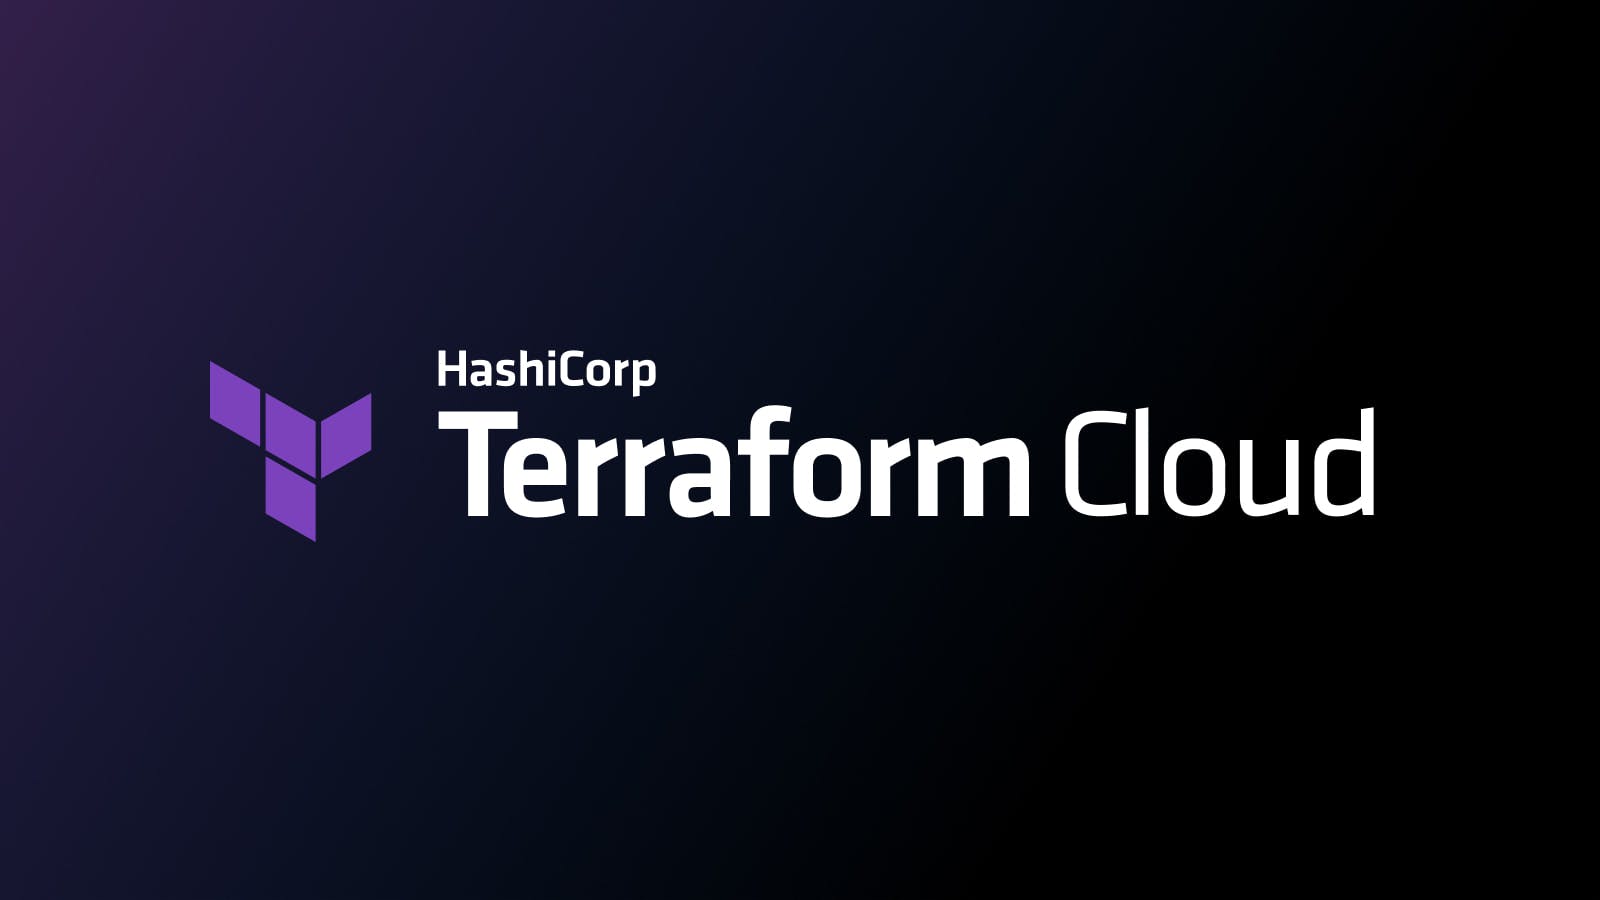 New Terraform Cloud capabilities to import, view, and manage infrastructure